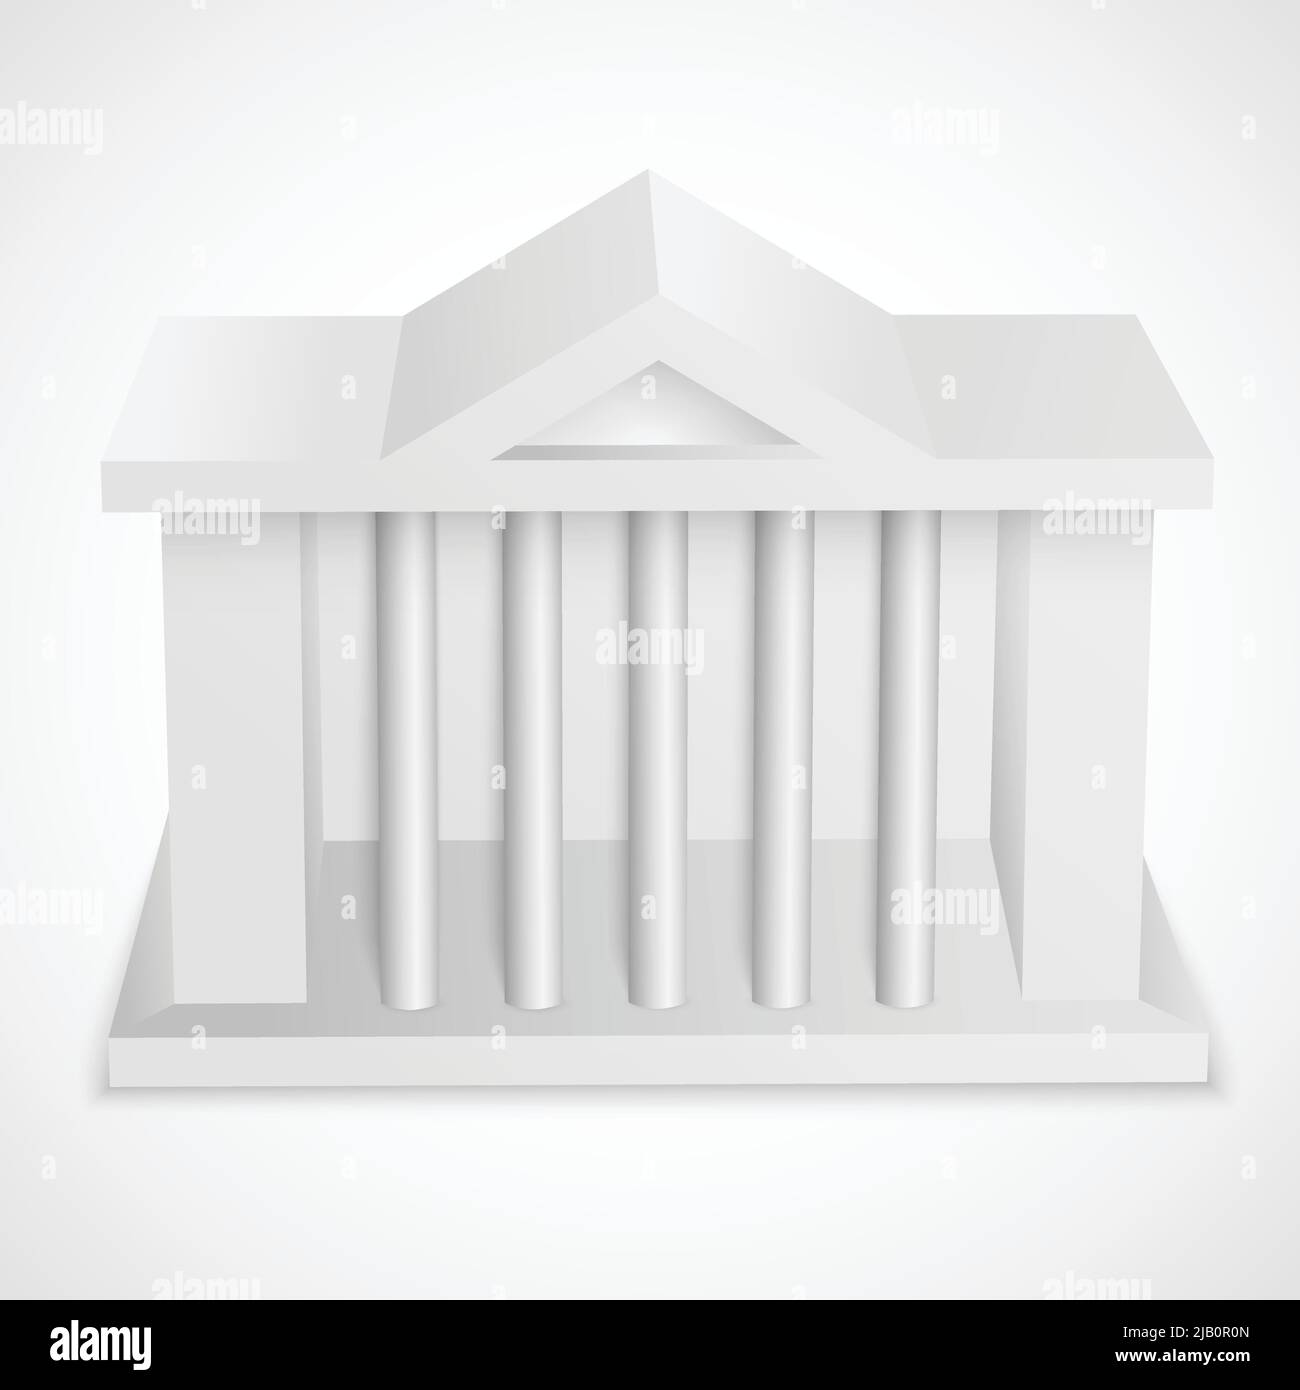 Bank icon white 3d building template isolated vector illustration Stock Vector